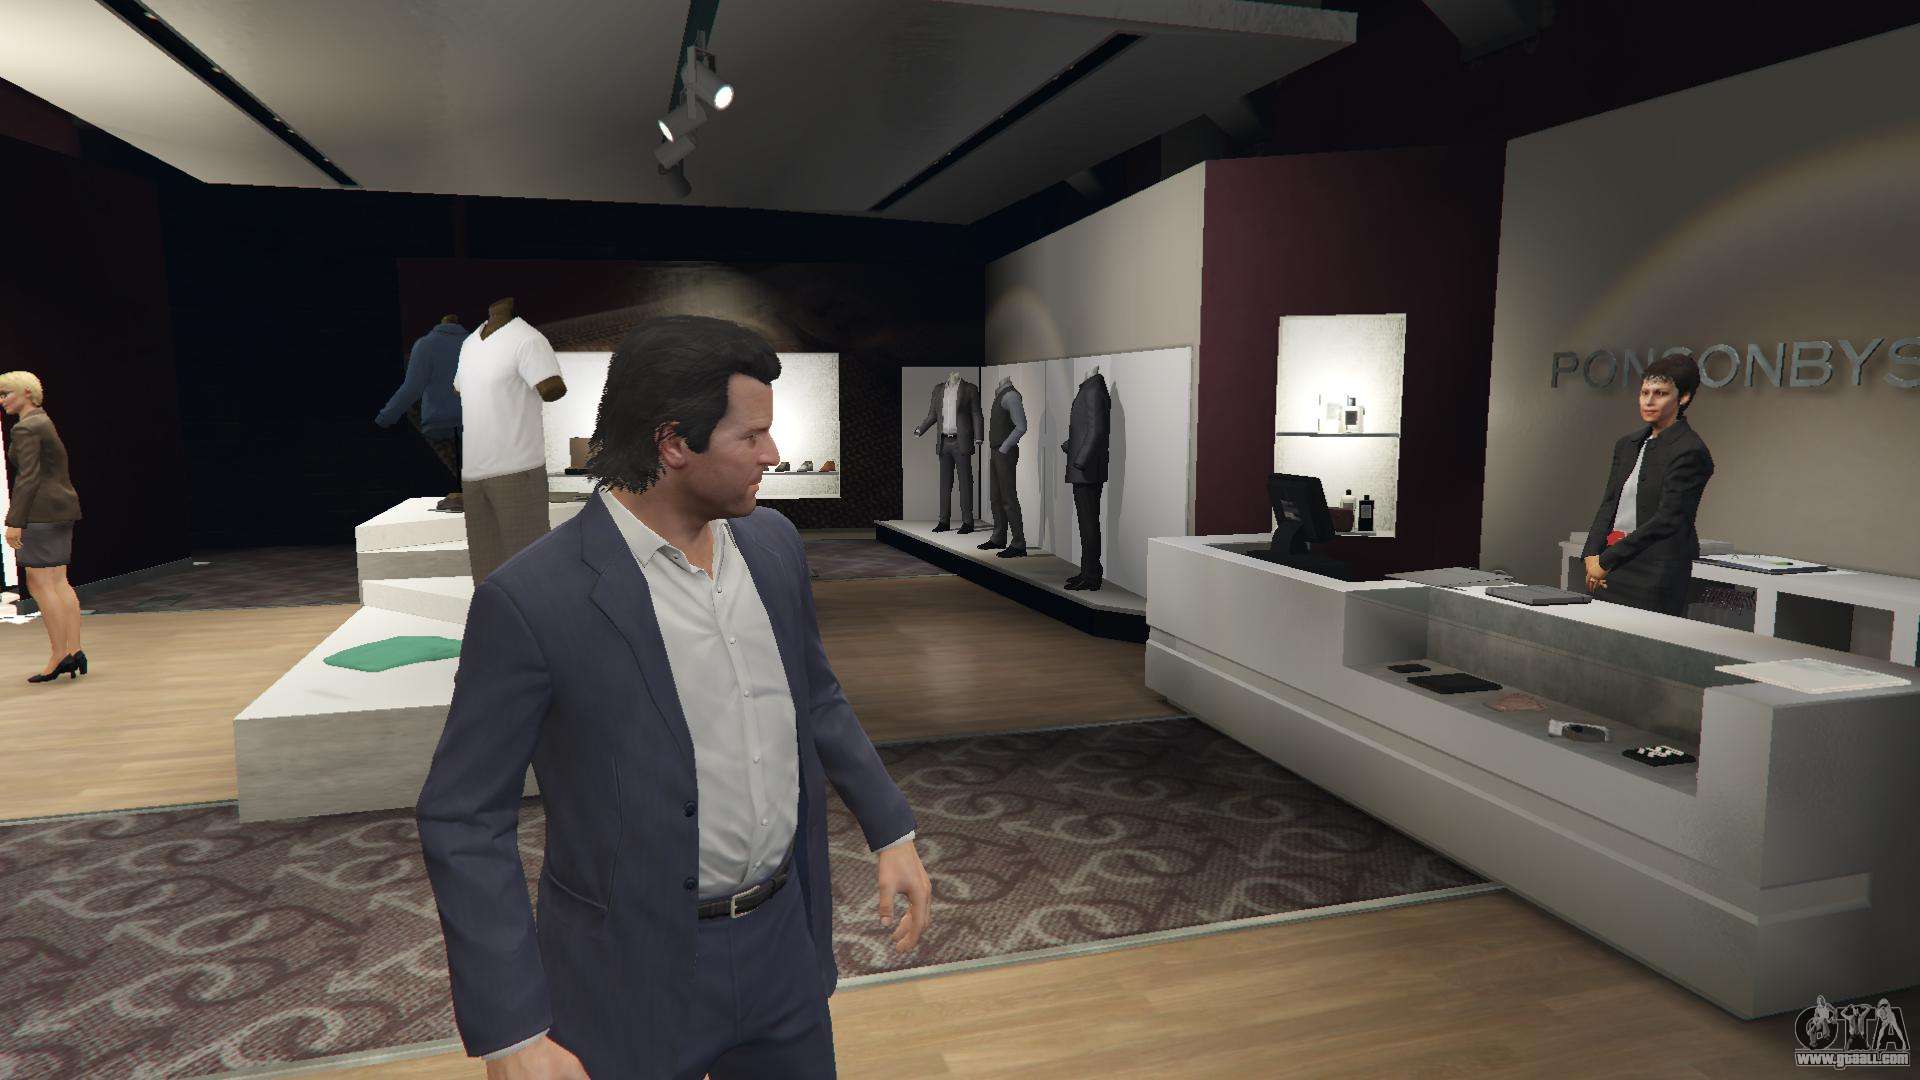 gta 5 high end clothes store